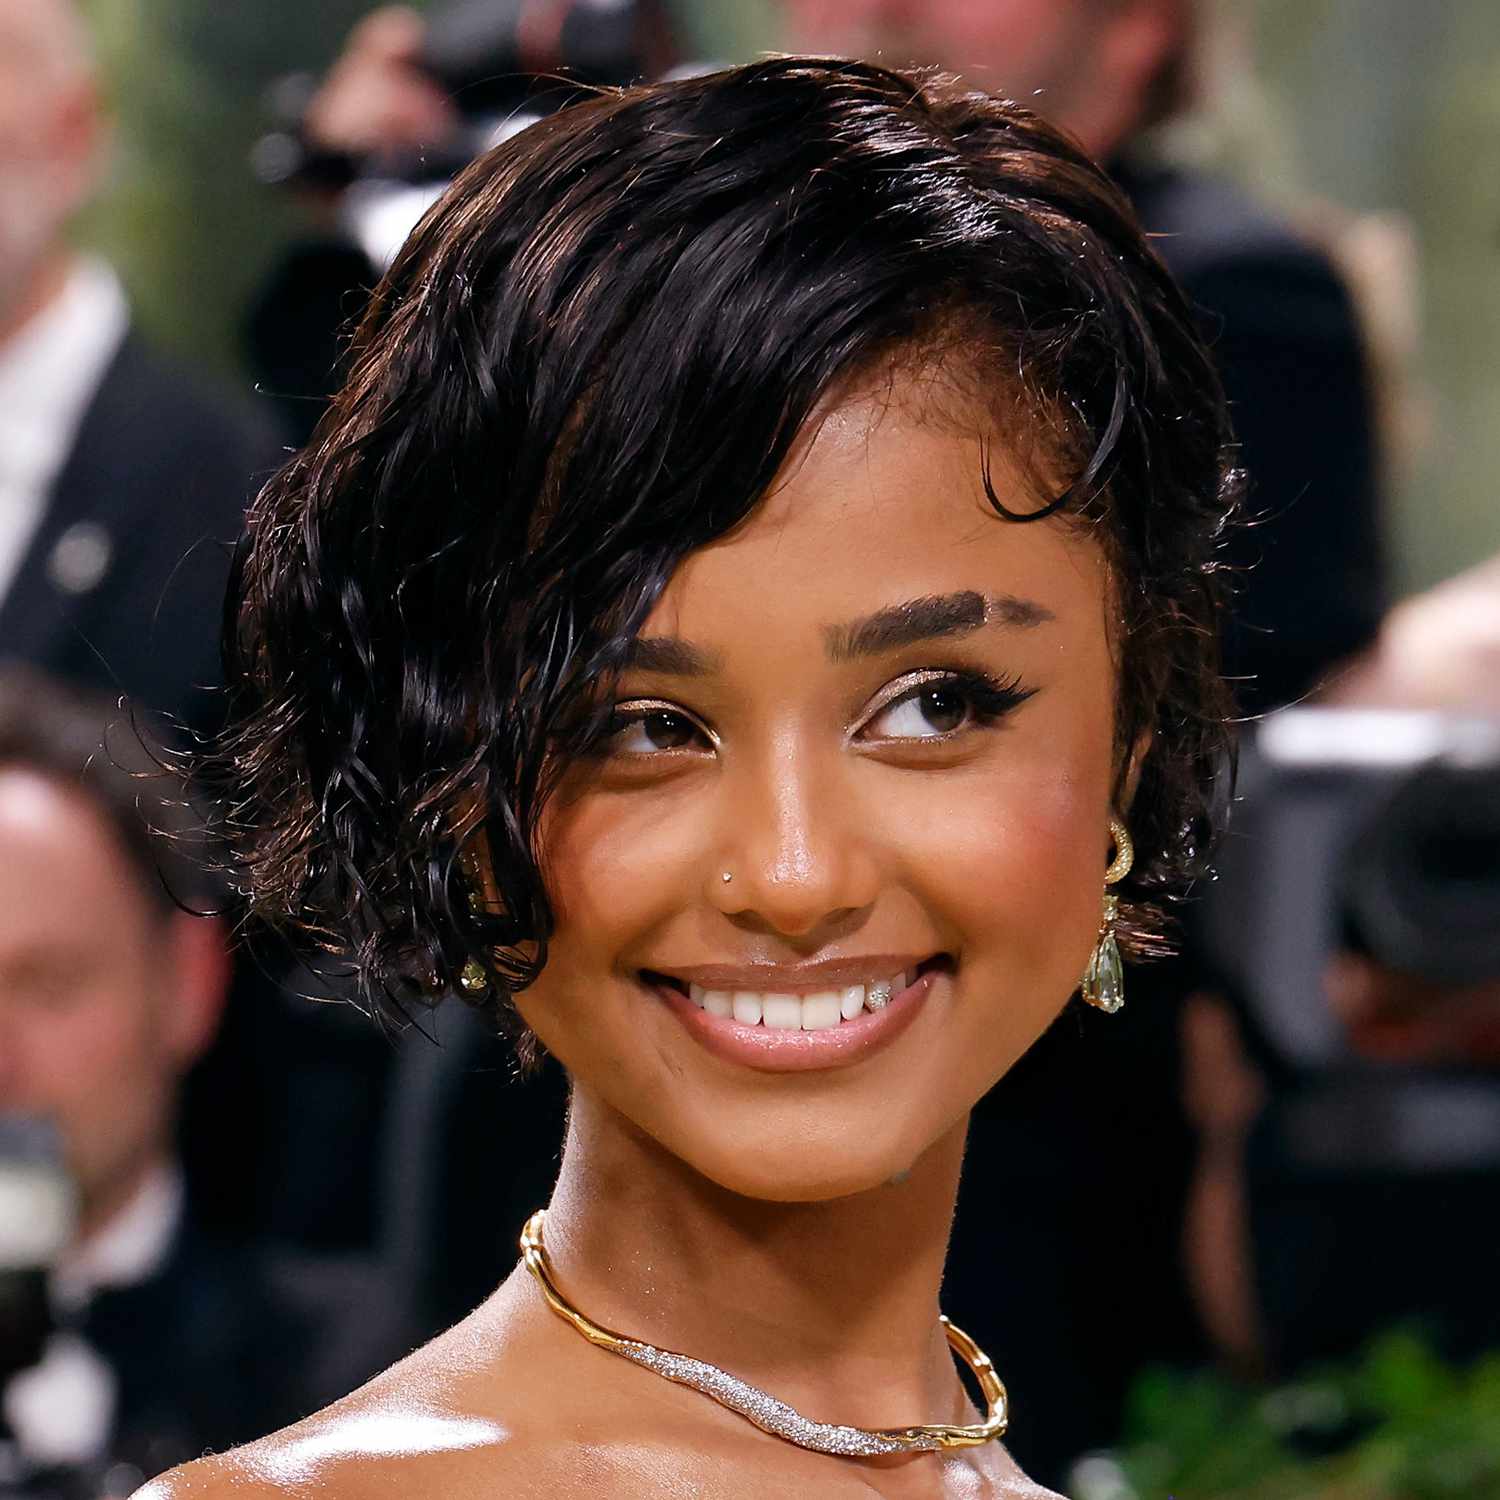 Tyla attends the Met Gala with a wet, wavy, side-parted bob